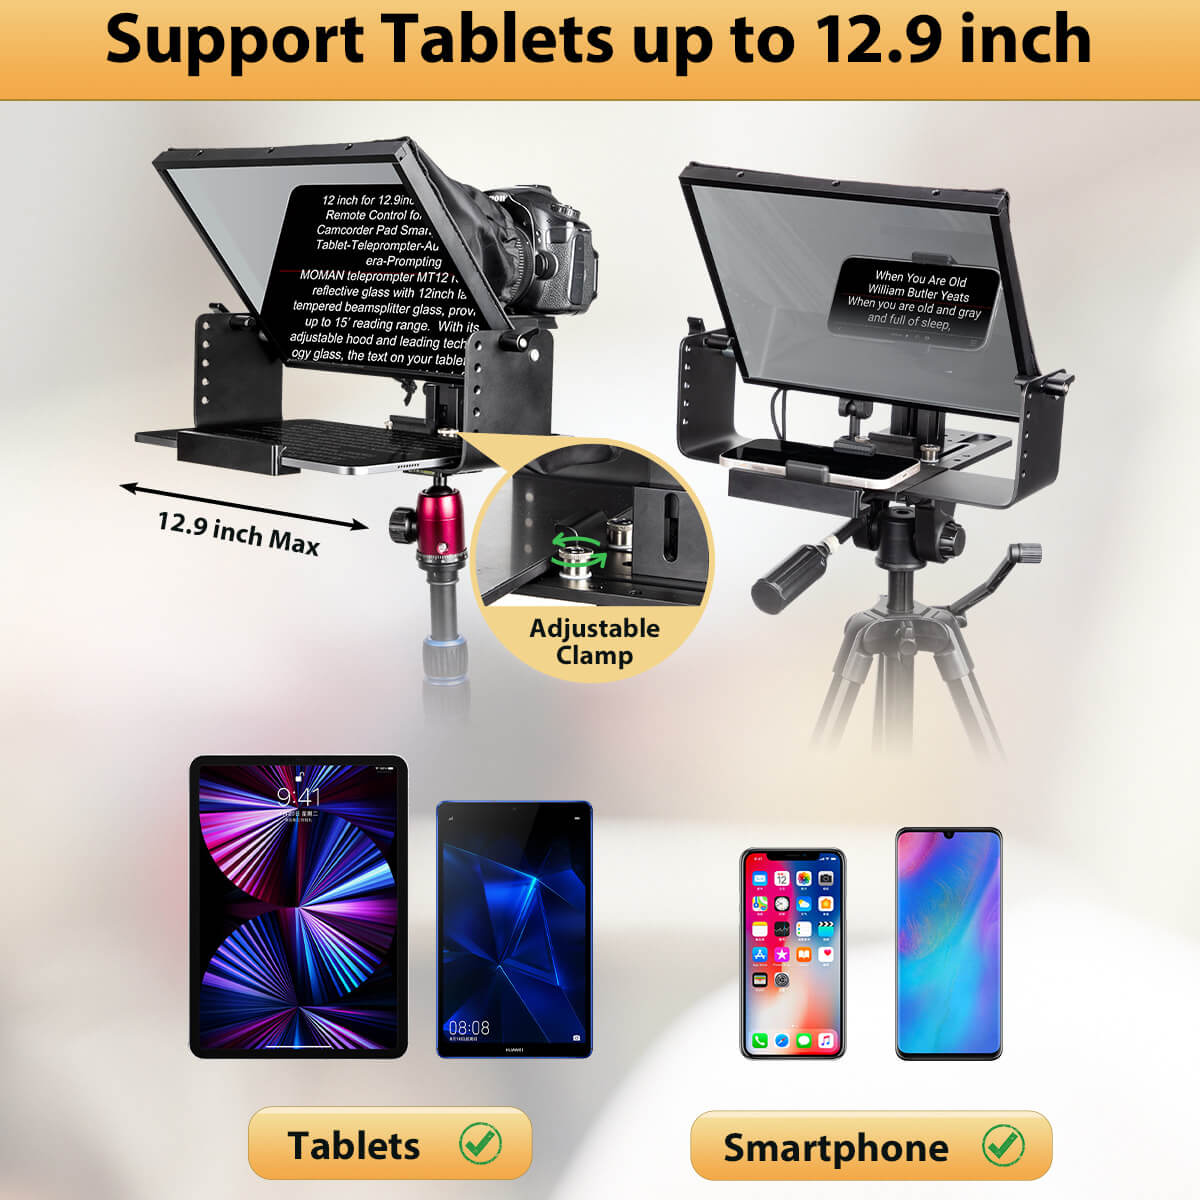 Moman MT12 supports tablets up to 12.9inch. Equipped with an adjustable clamp makes it a best professional teleprompter for cell phone as well